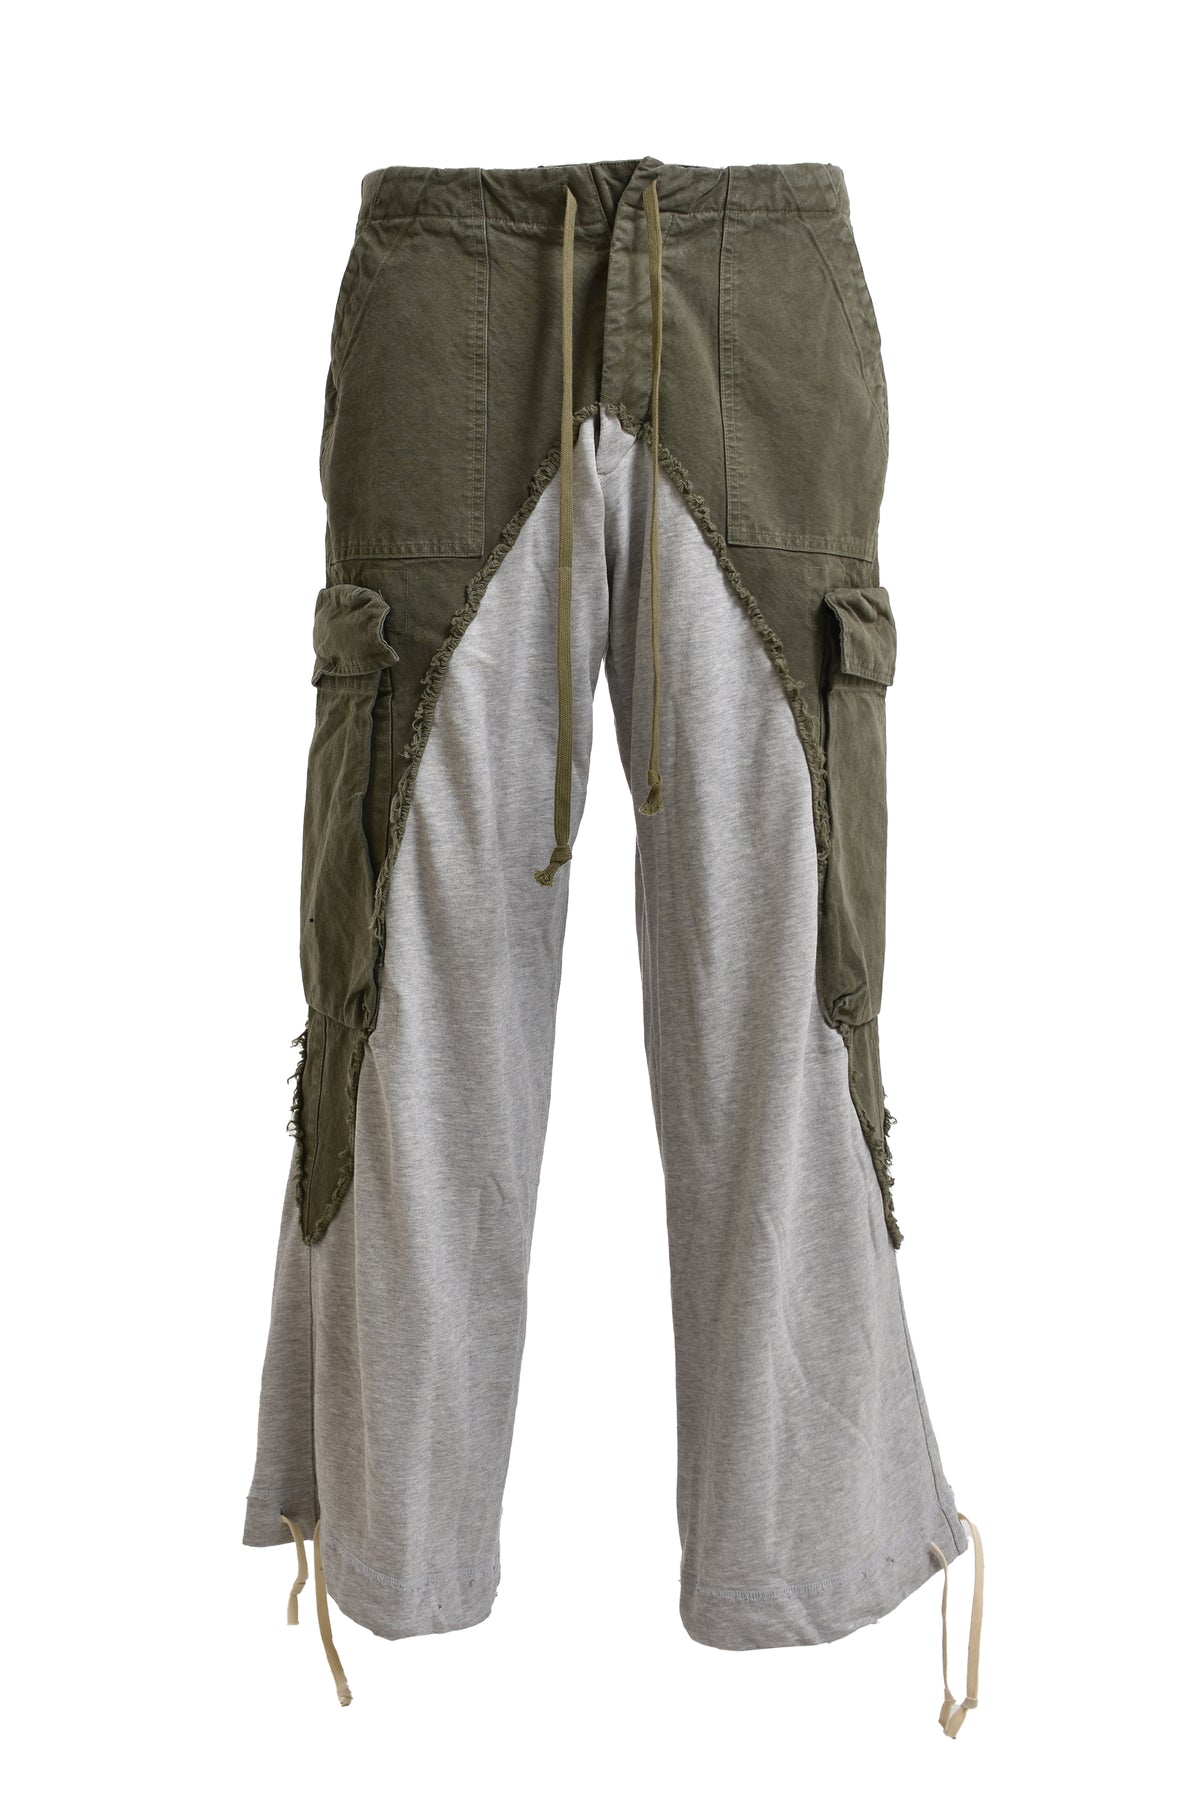 Greg Lauren ARMY/ HEATHER WIDE LEG / TO BE DETERMINED PENDING